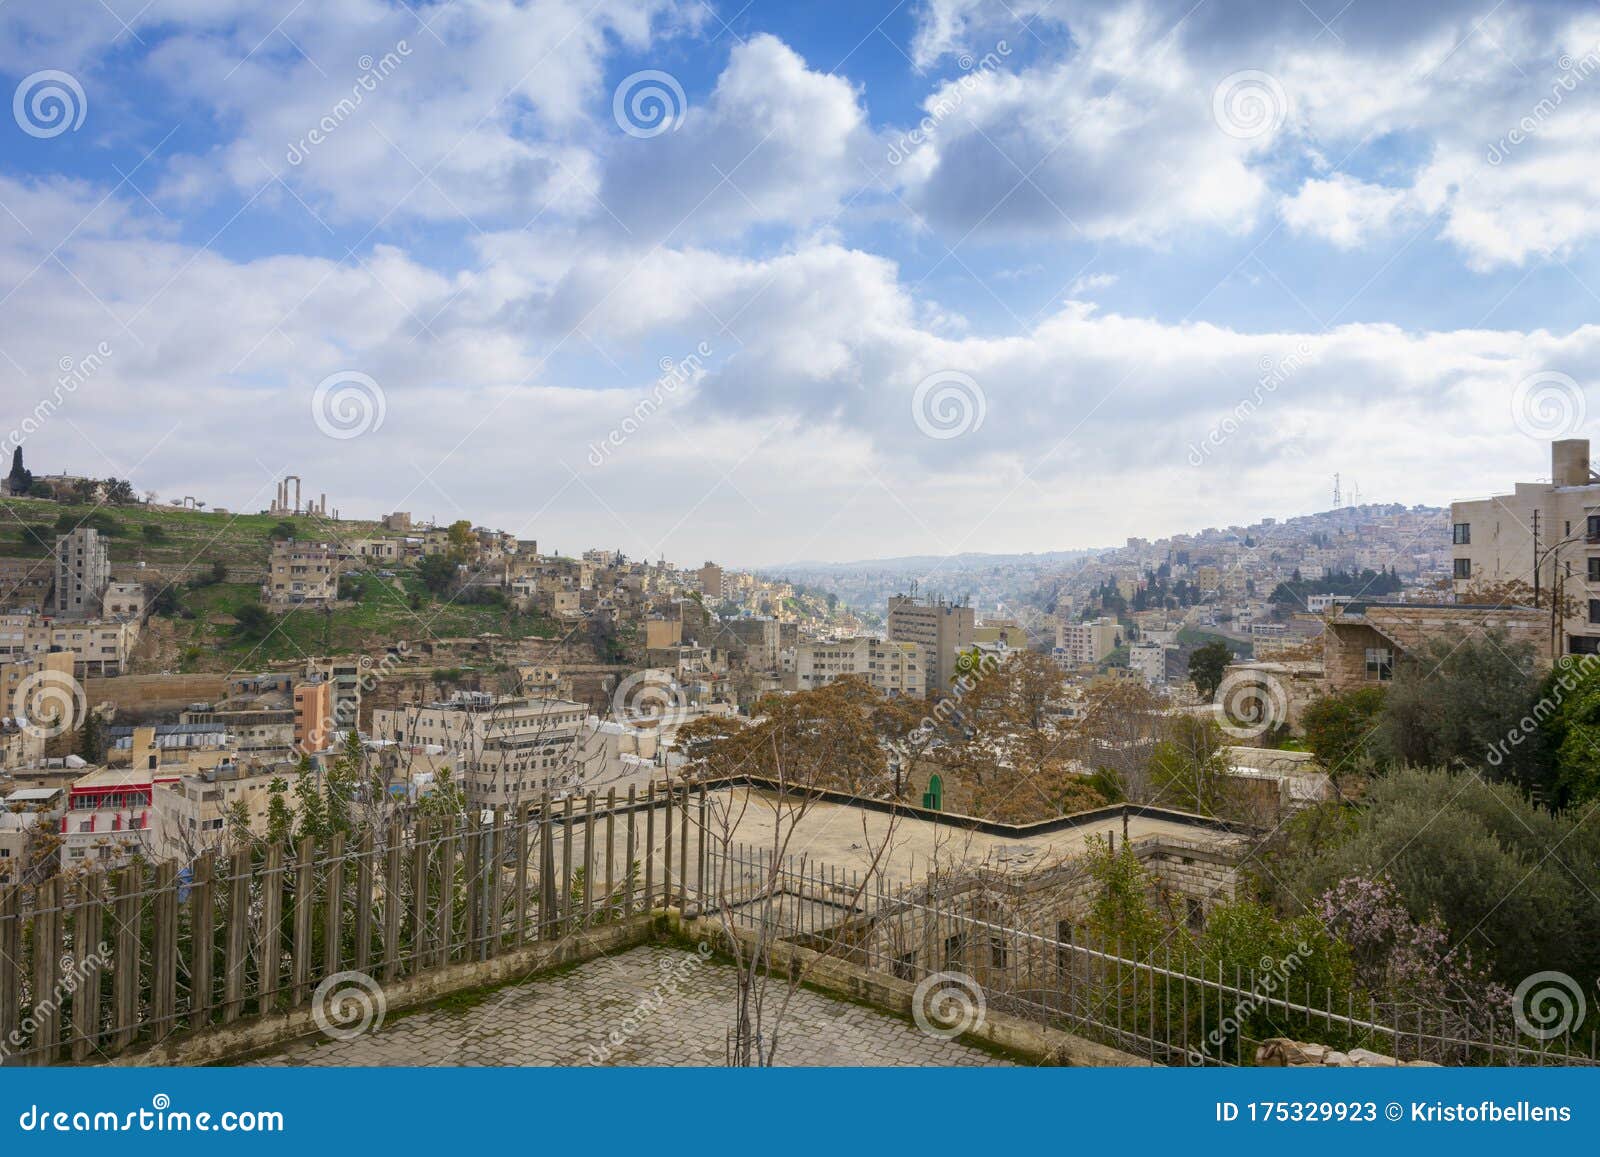 Cityscape of Downtown Amman in Jordan on a Sunny Day with Hills in the  Background Stock Image - Image of amman, district: 175329923